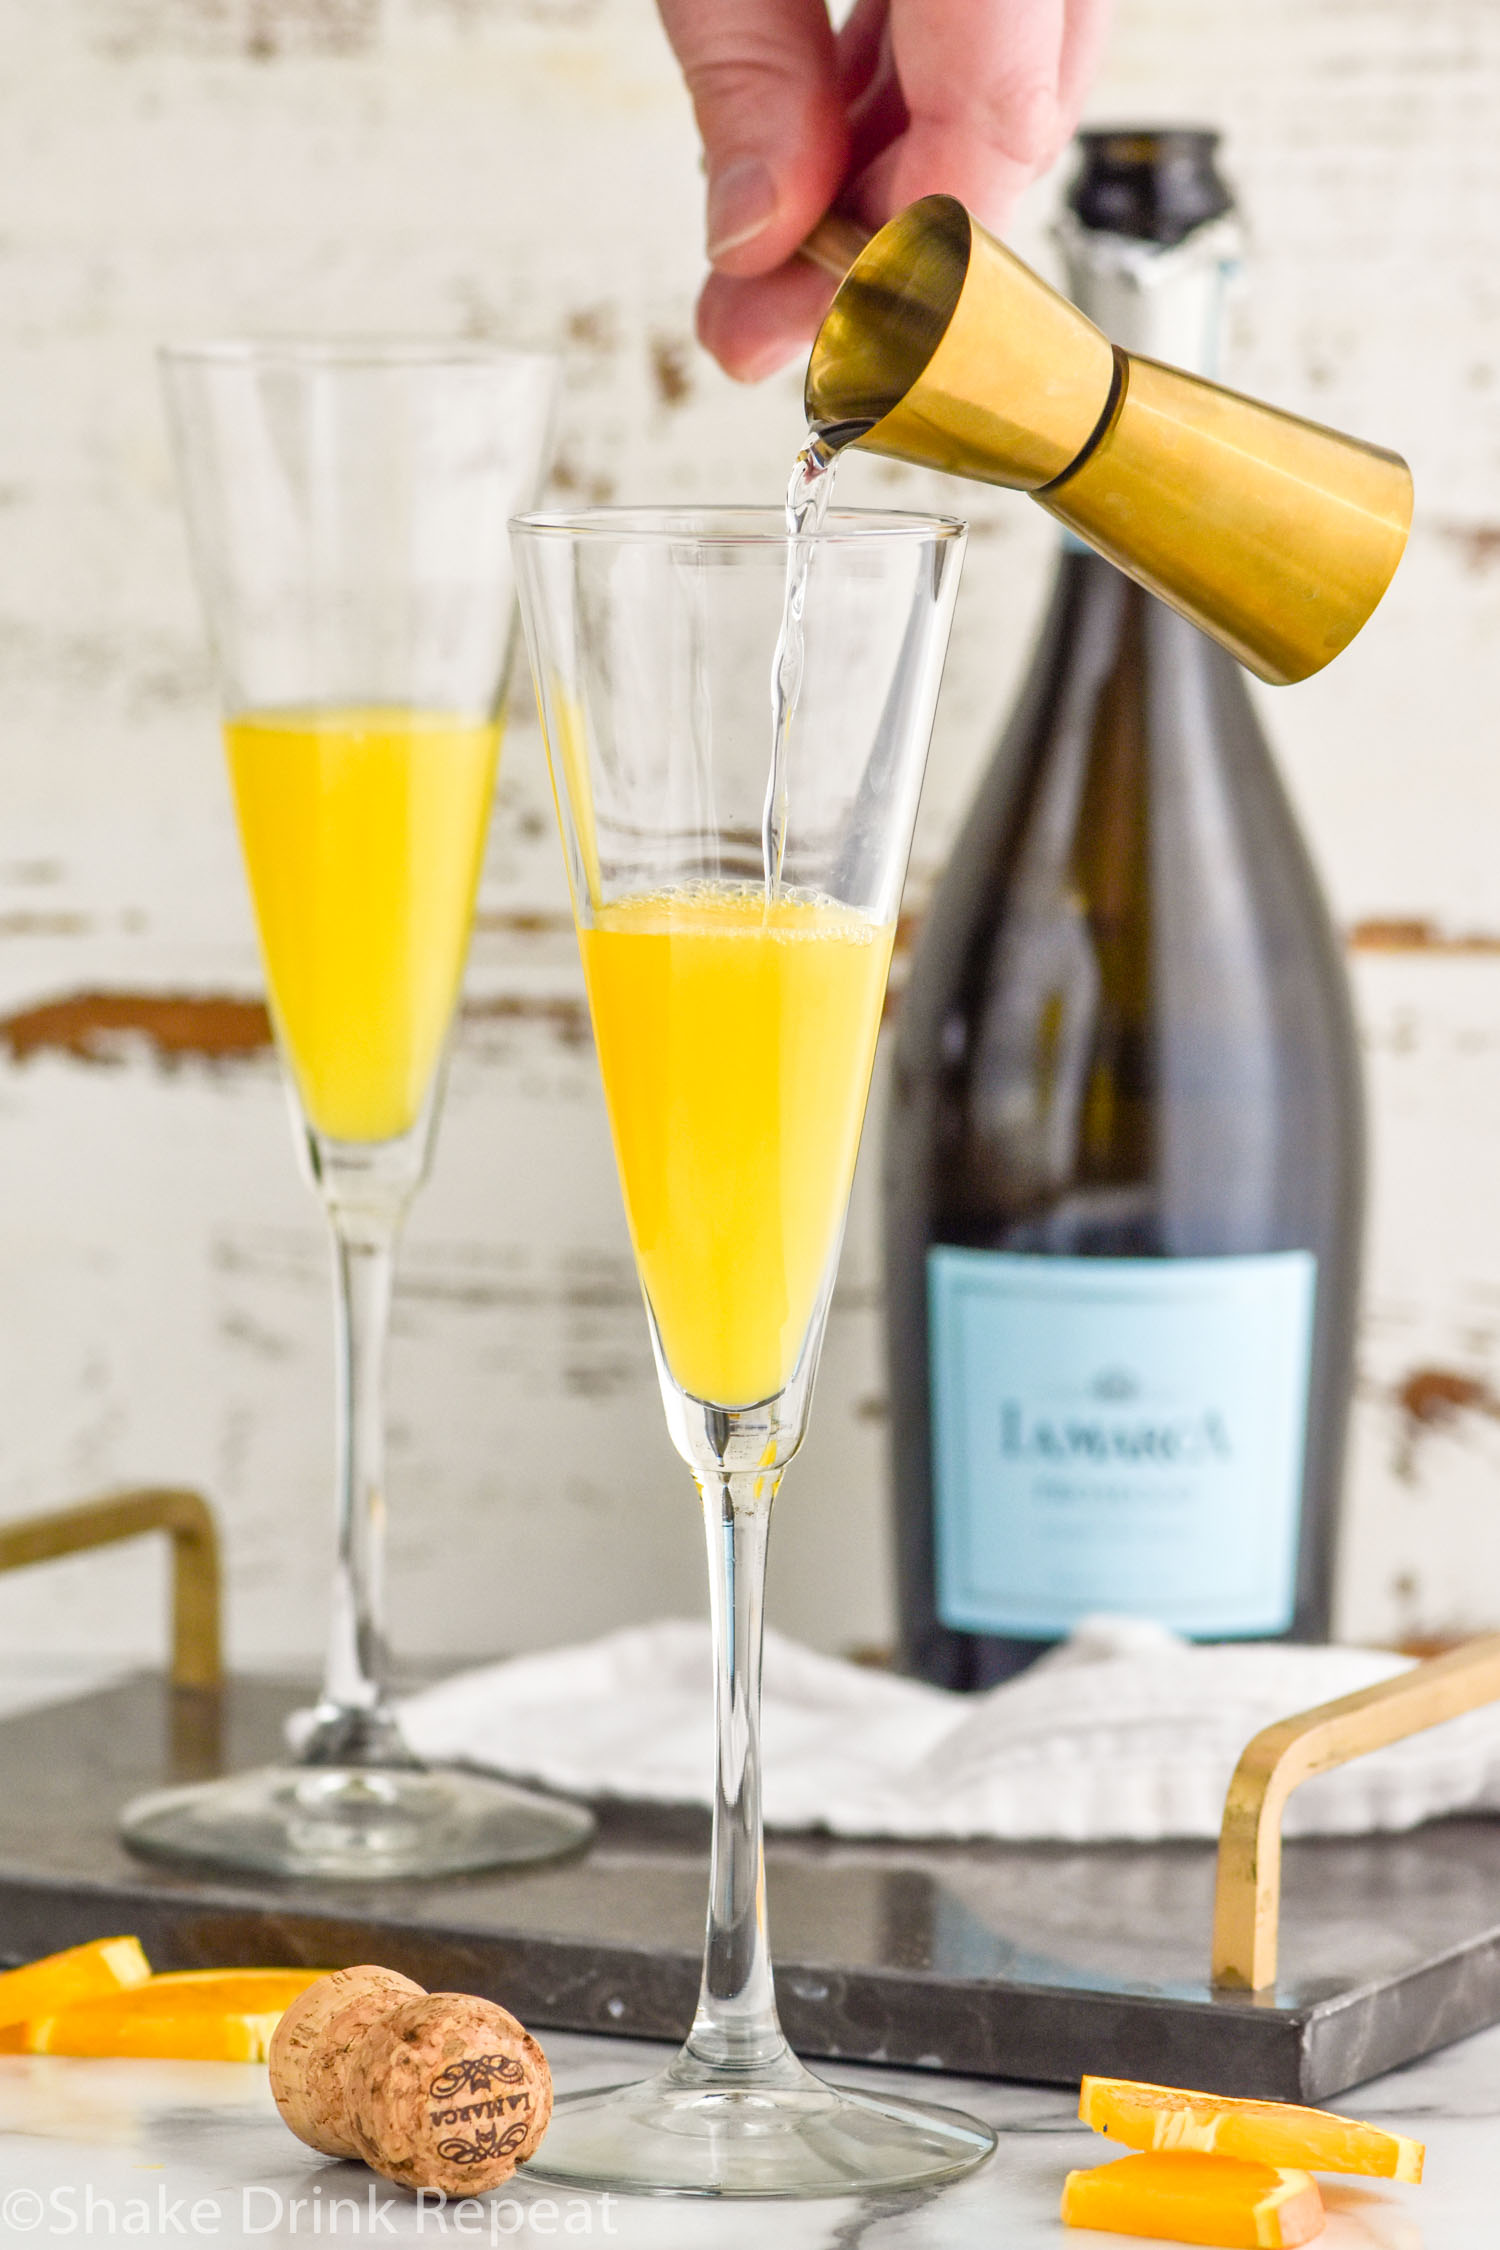 Photo of person's hand pouring Cointreau into flute glasses of orange juice for Mimosa recipe. Bottle of Champagne in background for Mimosa recipe.